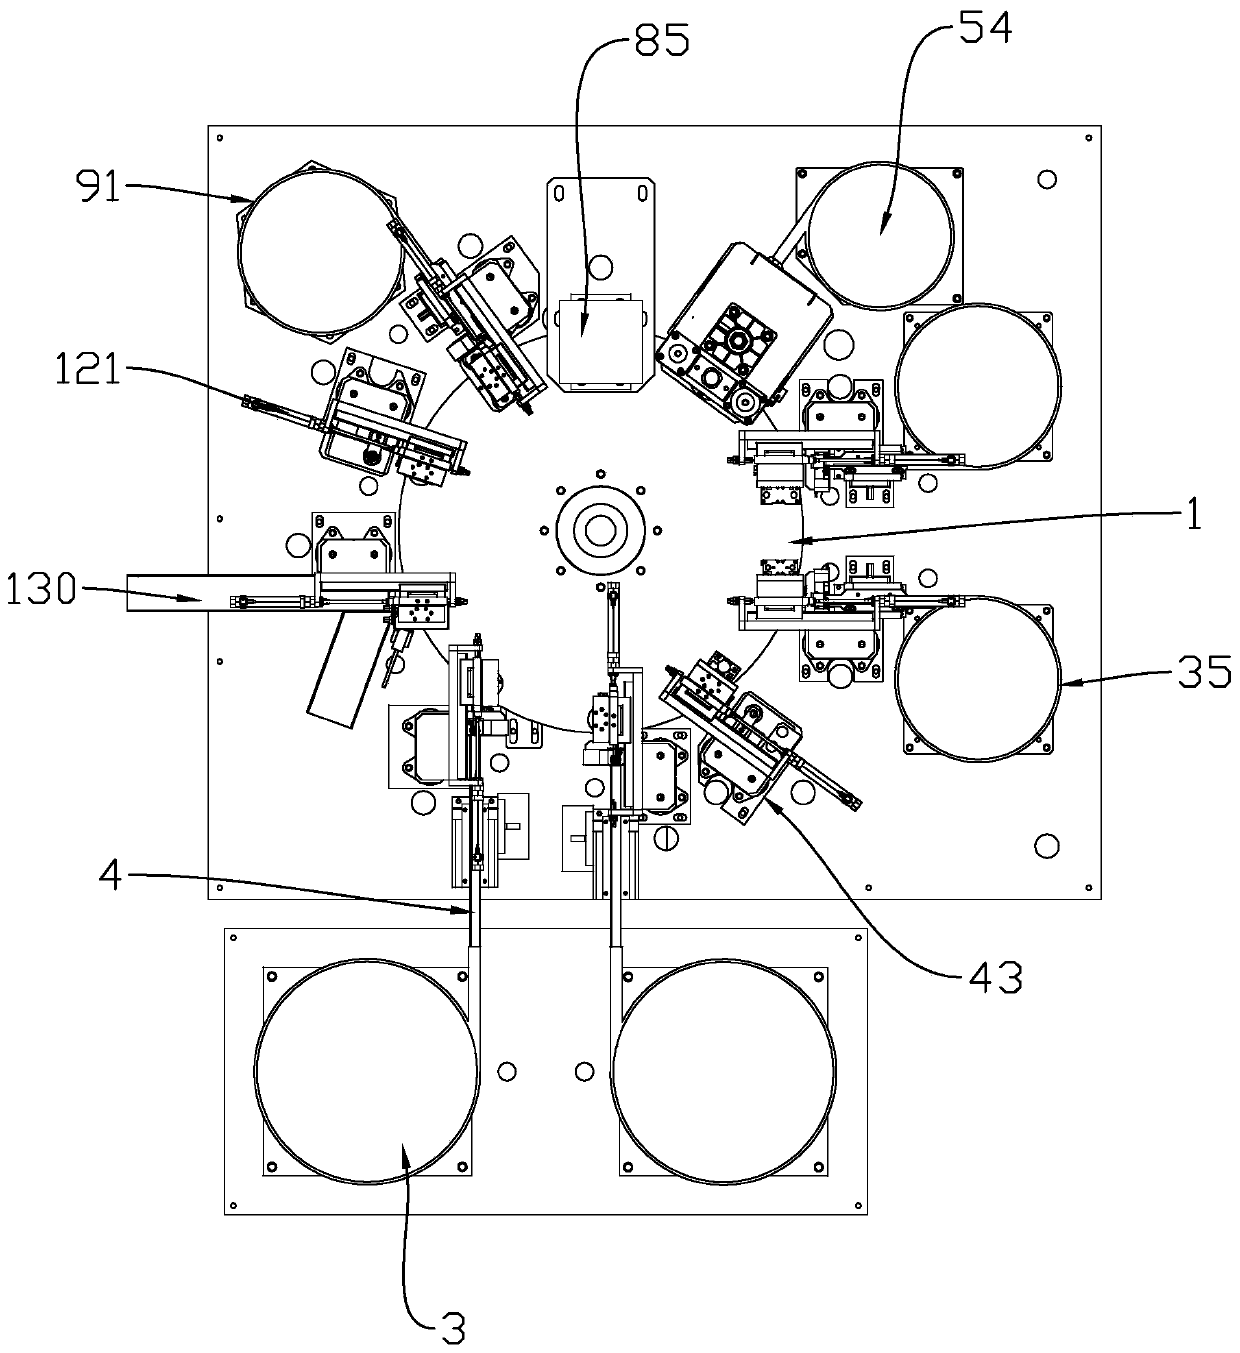 Automatic assembling equipment for valve body assembly of reading valve